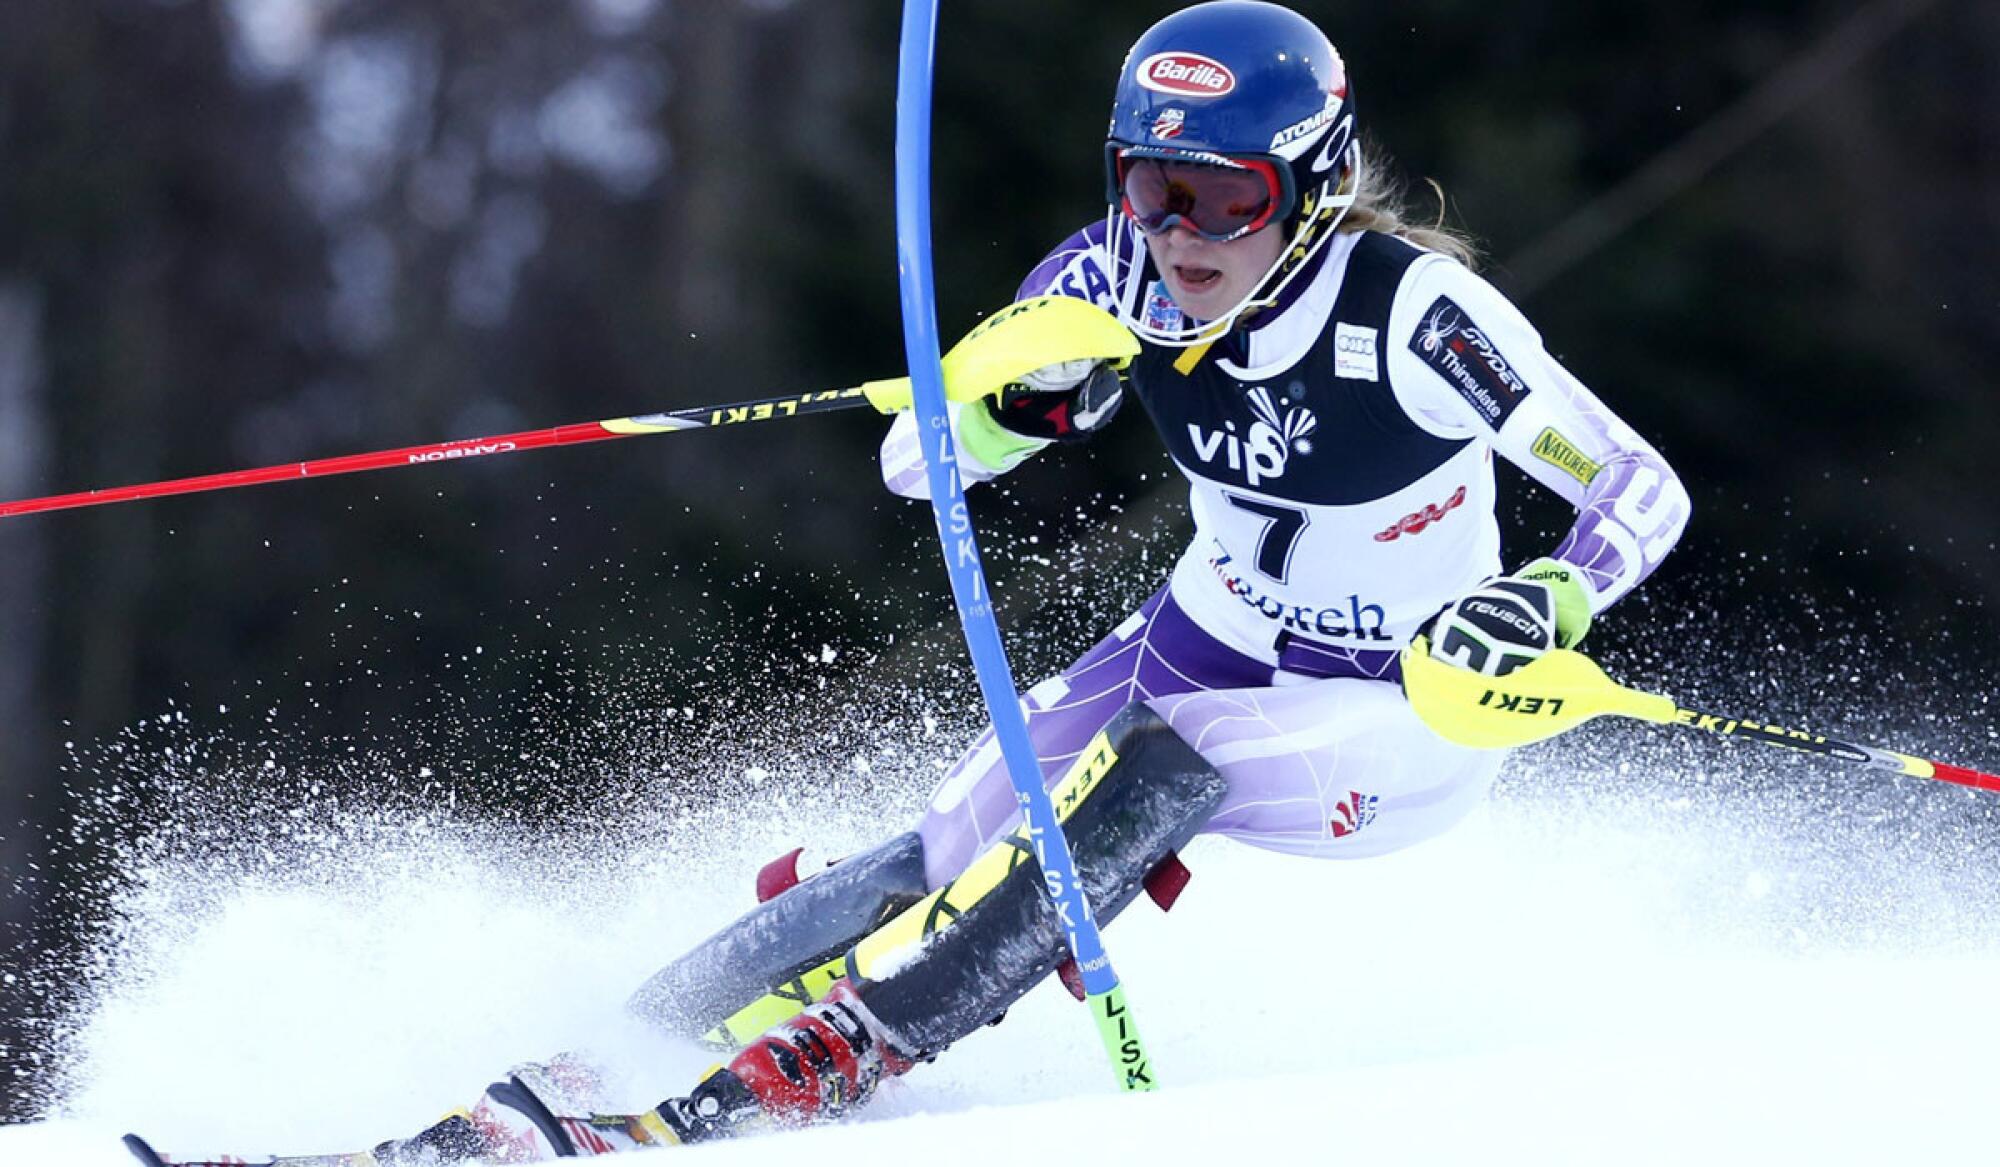 Mikaela Shiffrin captured her 11th World Cup slalom victory with a win at Sljeme Mount, Croatia, in January 2015. It tied the record for wins by a teenager in the event.